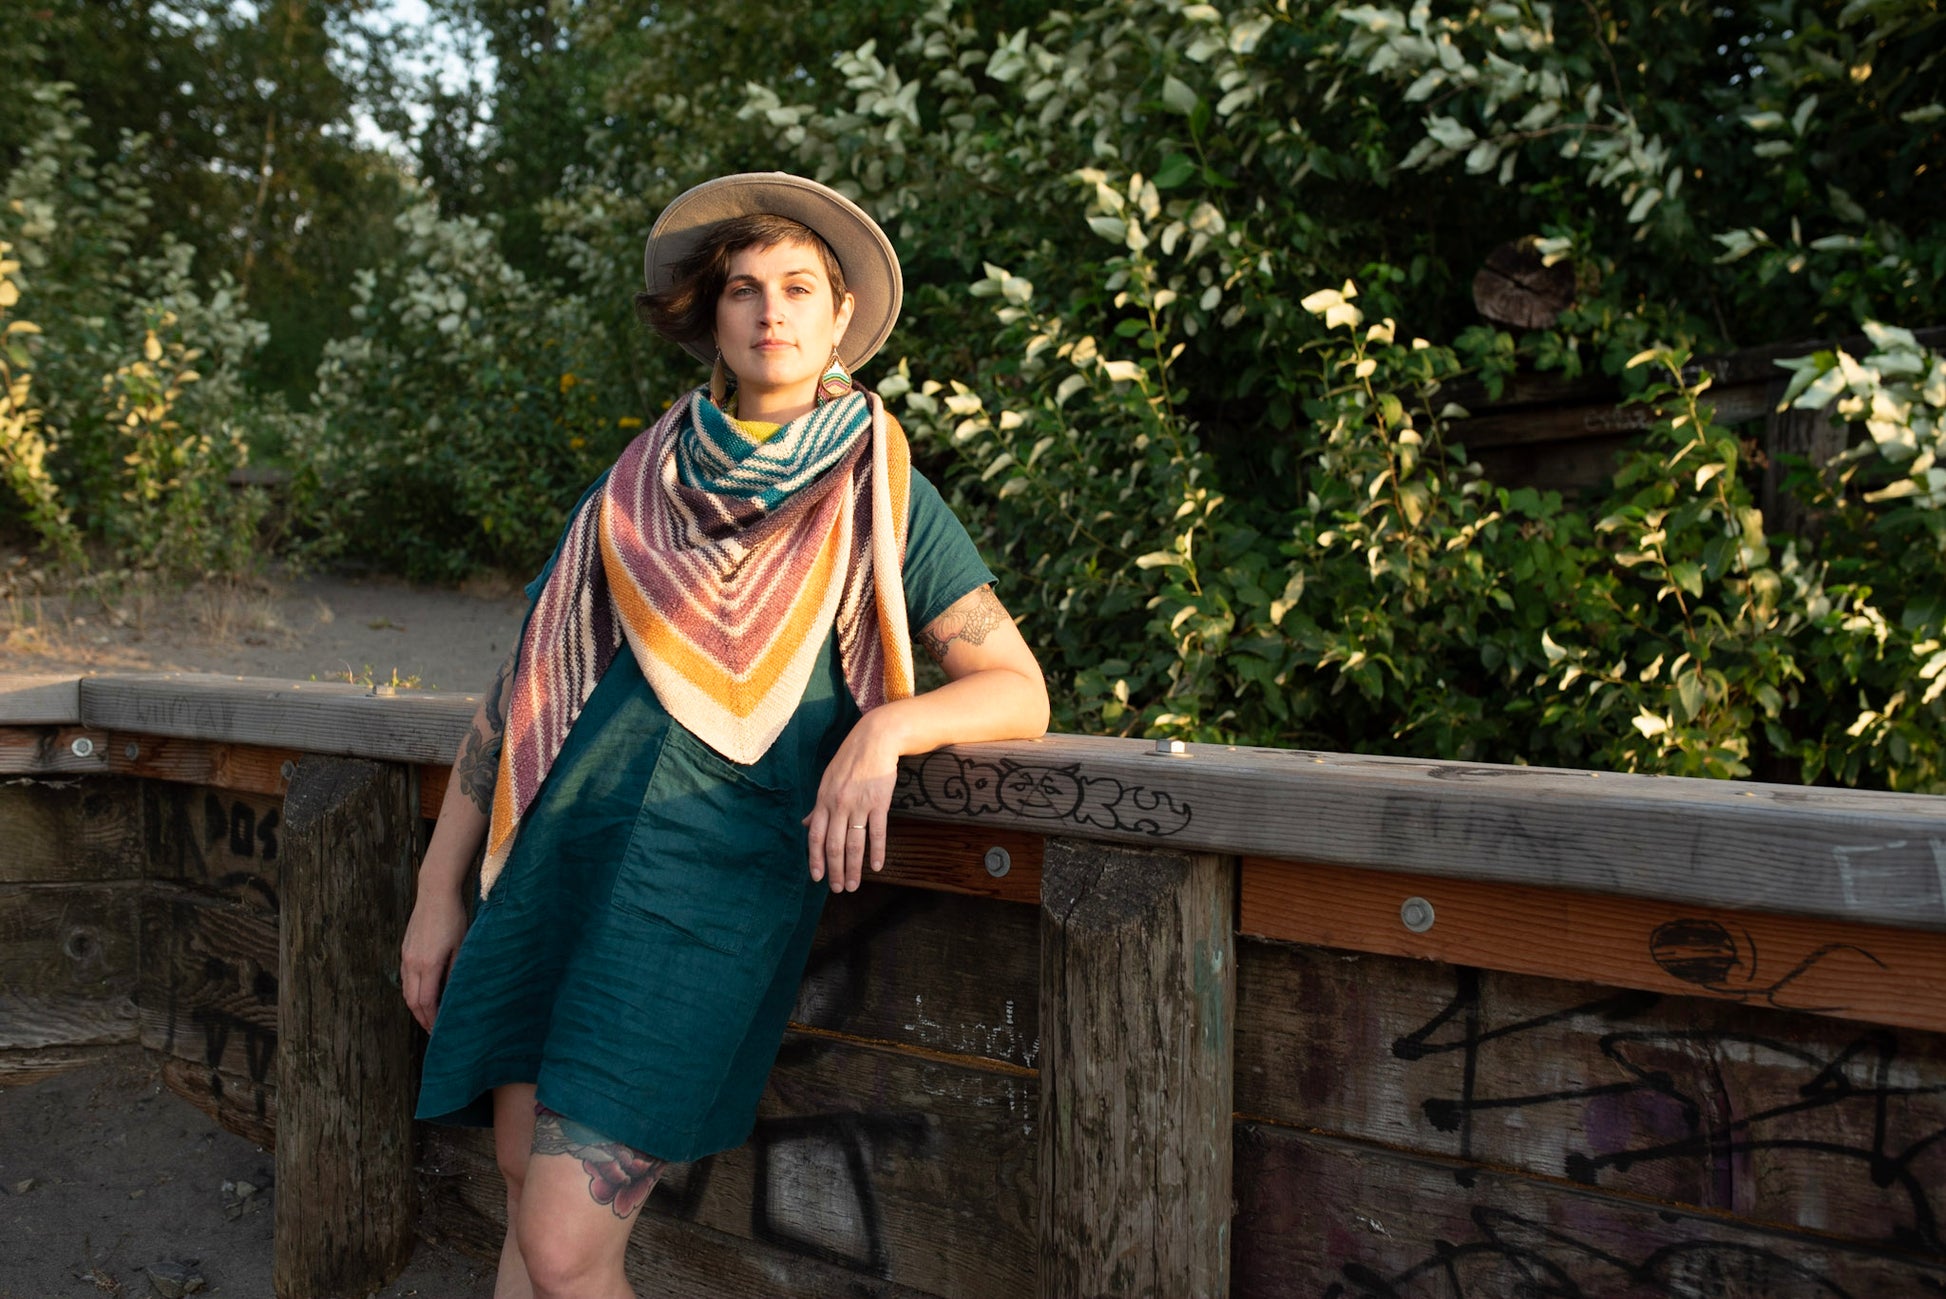 Jen leans against a wooden railing, smiling at the camera. She wears a multicolored shawl, knit in a triangle shape, with a blue dress and a white hat.